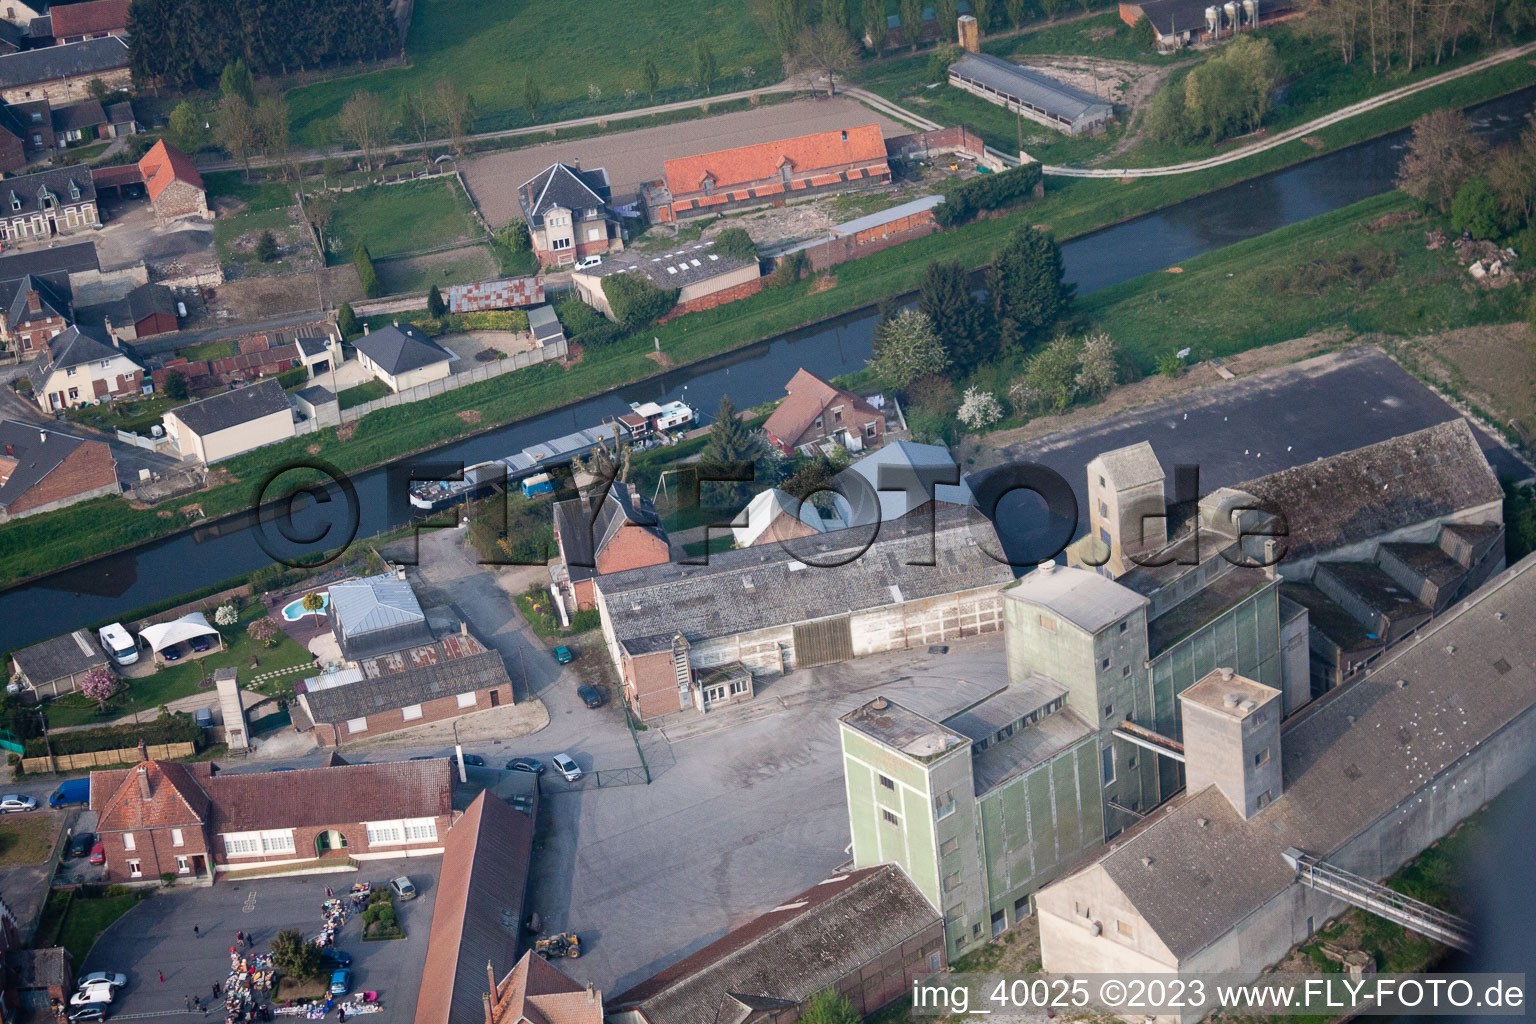 Vendhuile in the state Aisne, France from above